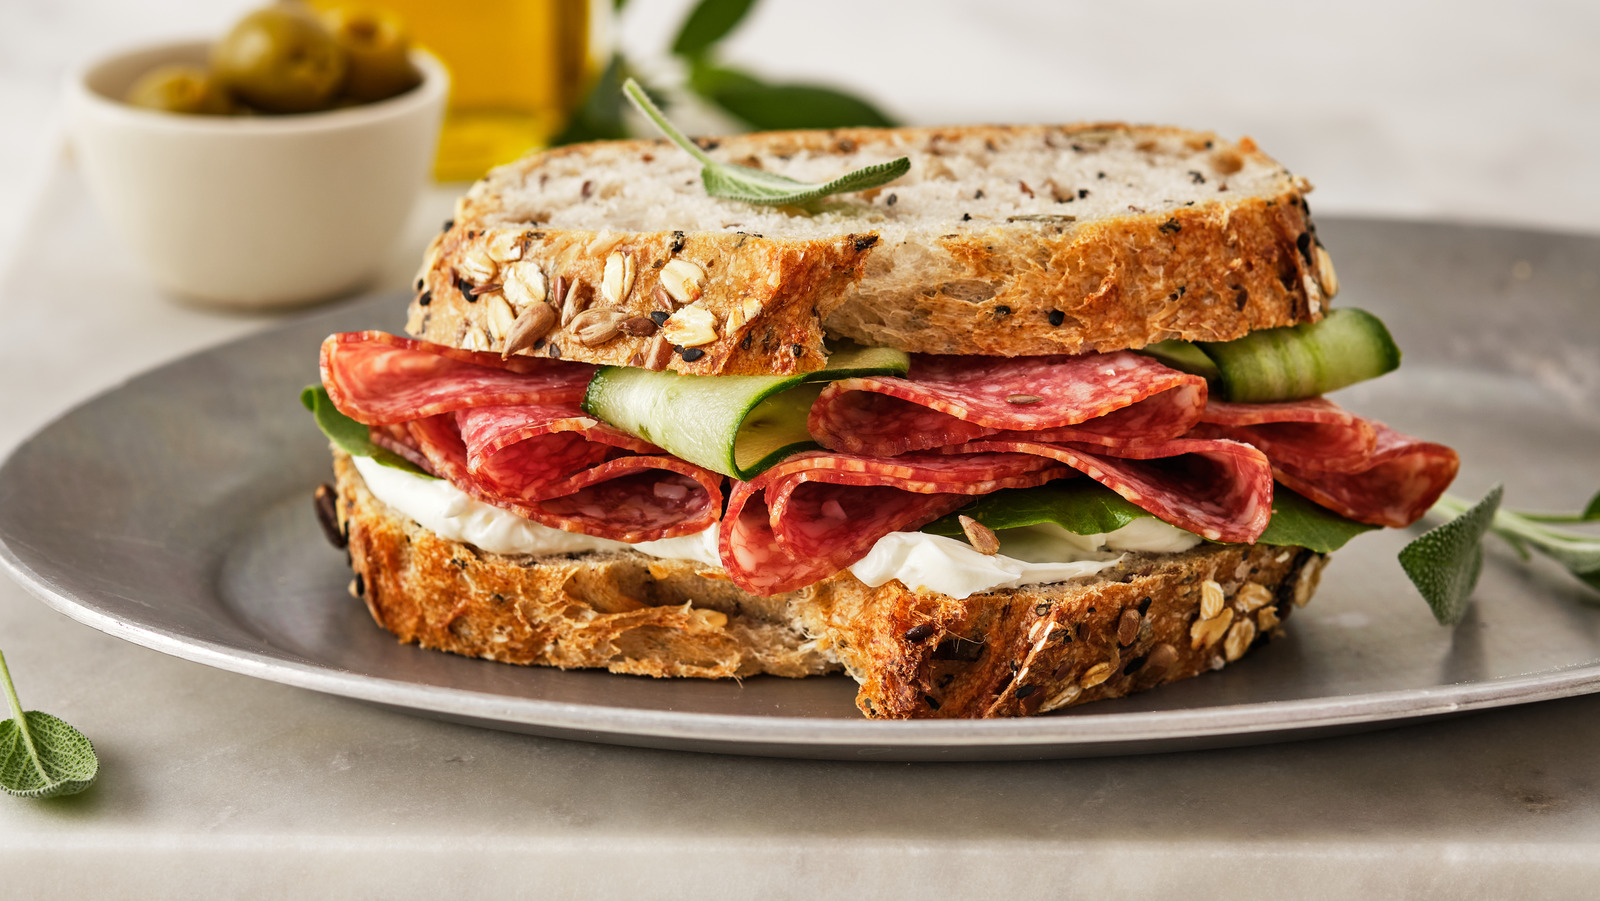 The Mayo Swap To Shake Up Ordinary Cold Cut Sandwiches